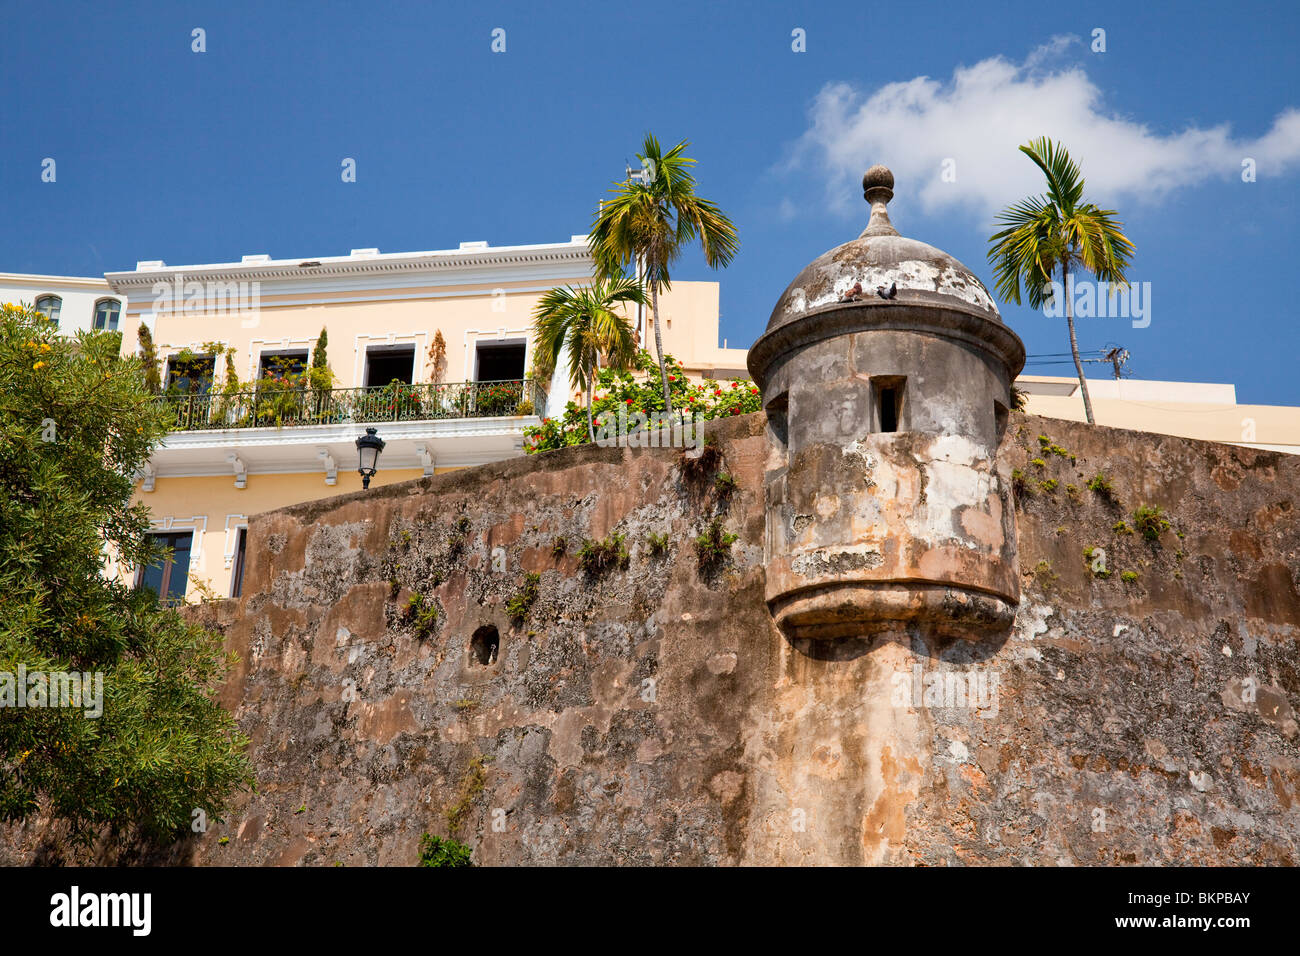 The old city walls with sentry box in San Juan, Puerto Rico, West Indies. Stock Photo